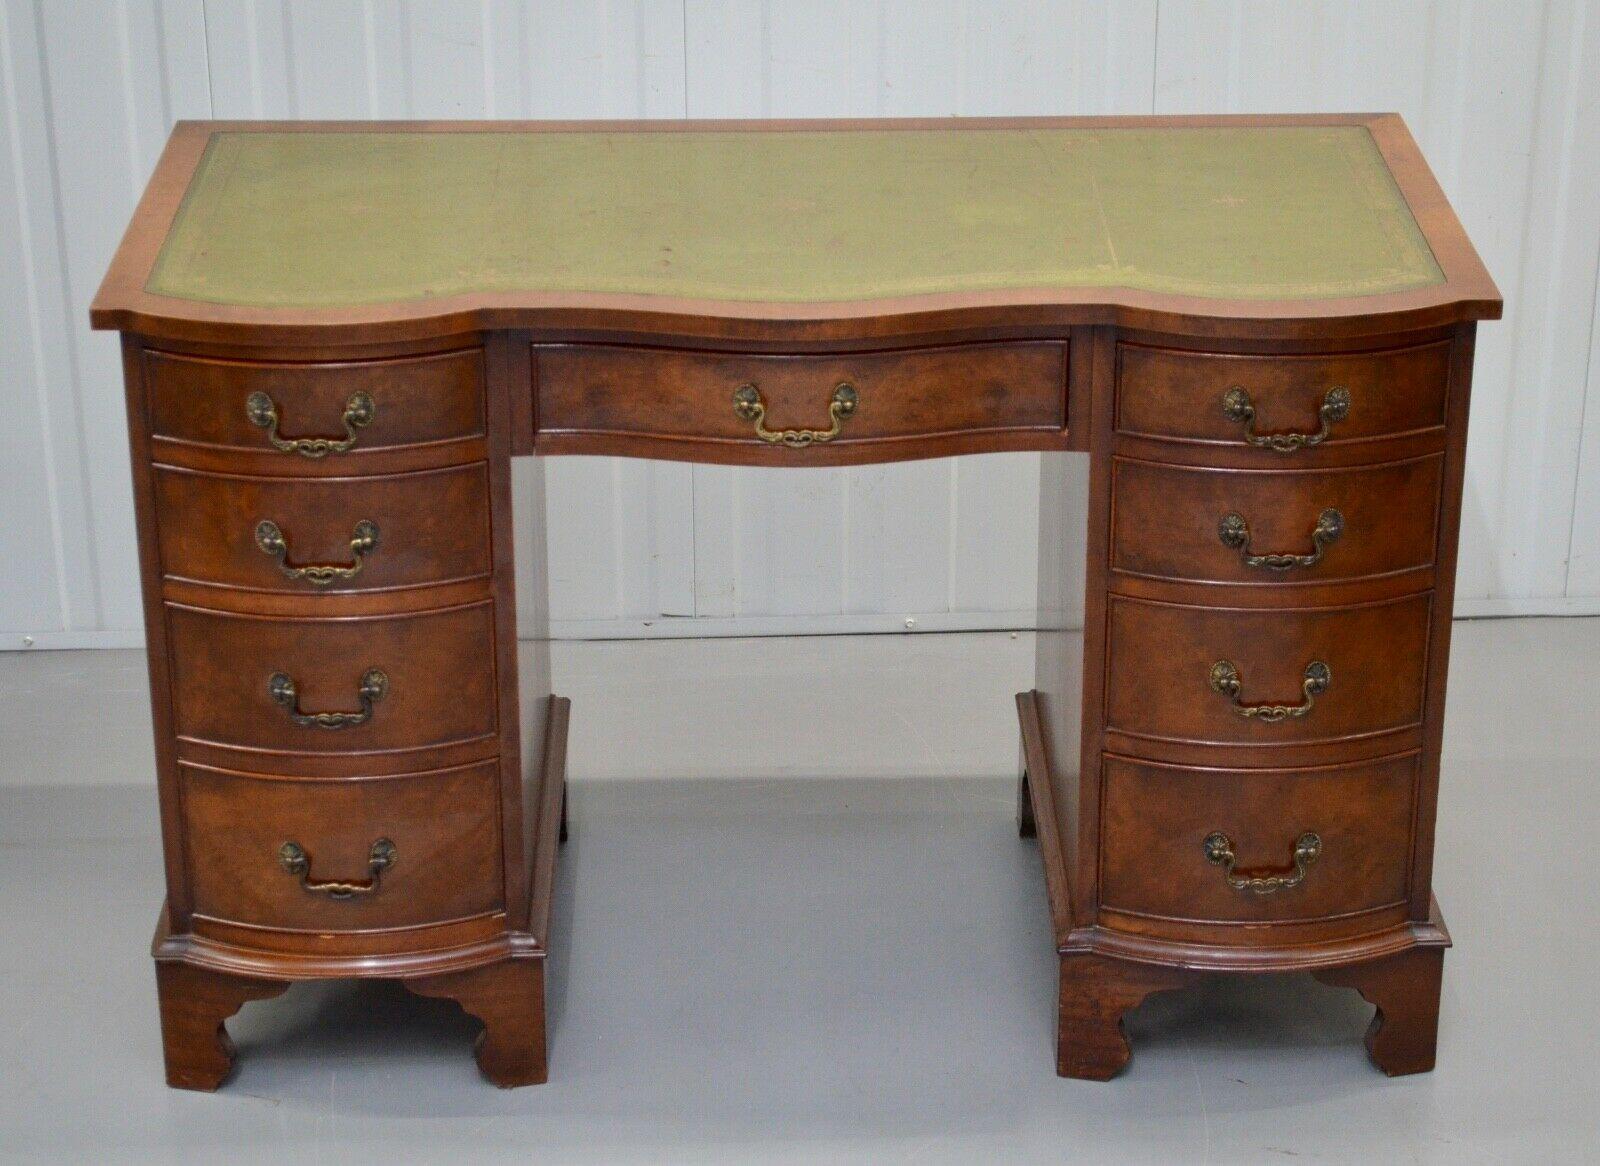 Hand-Crafted 20th Century Walnut Serpentine Pedestal Flamed Desk / Chair Available